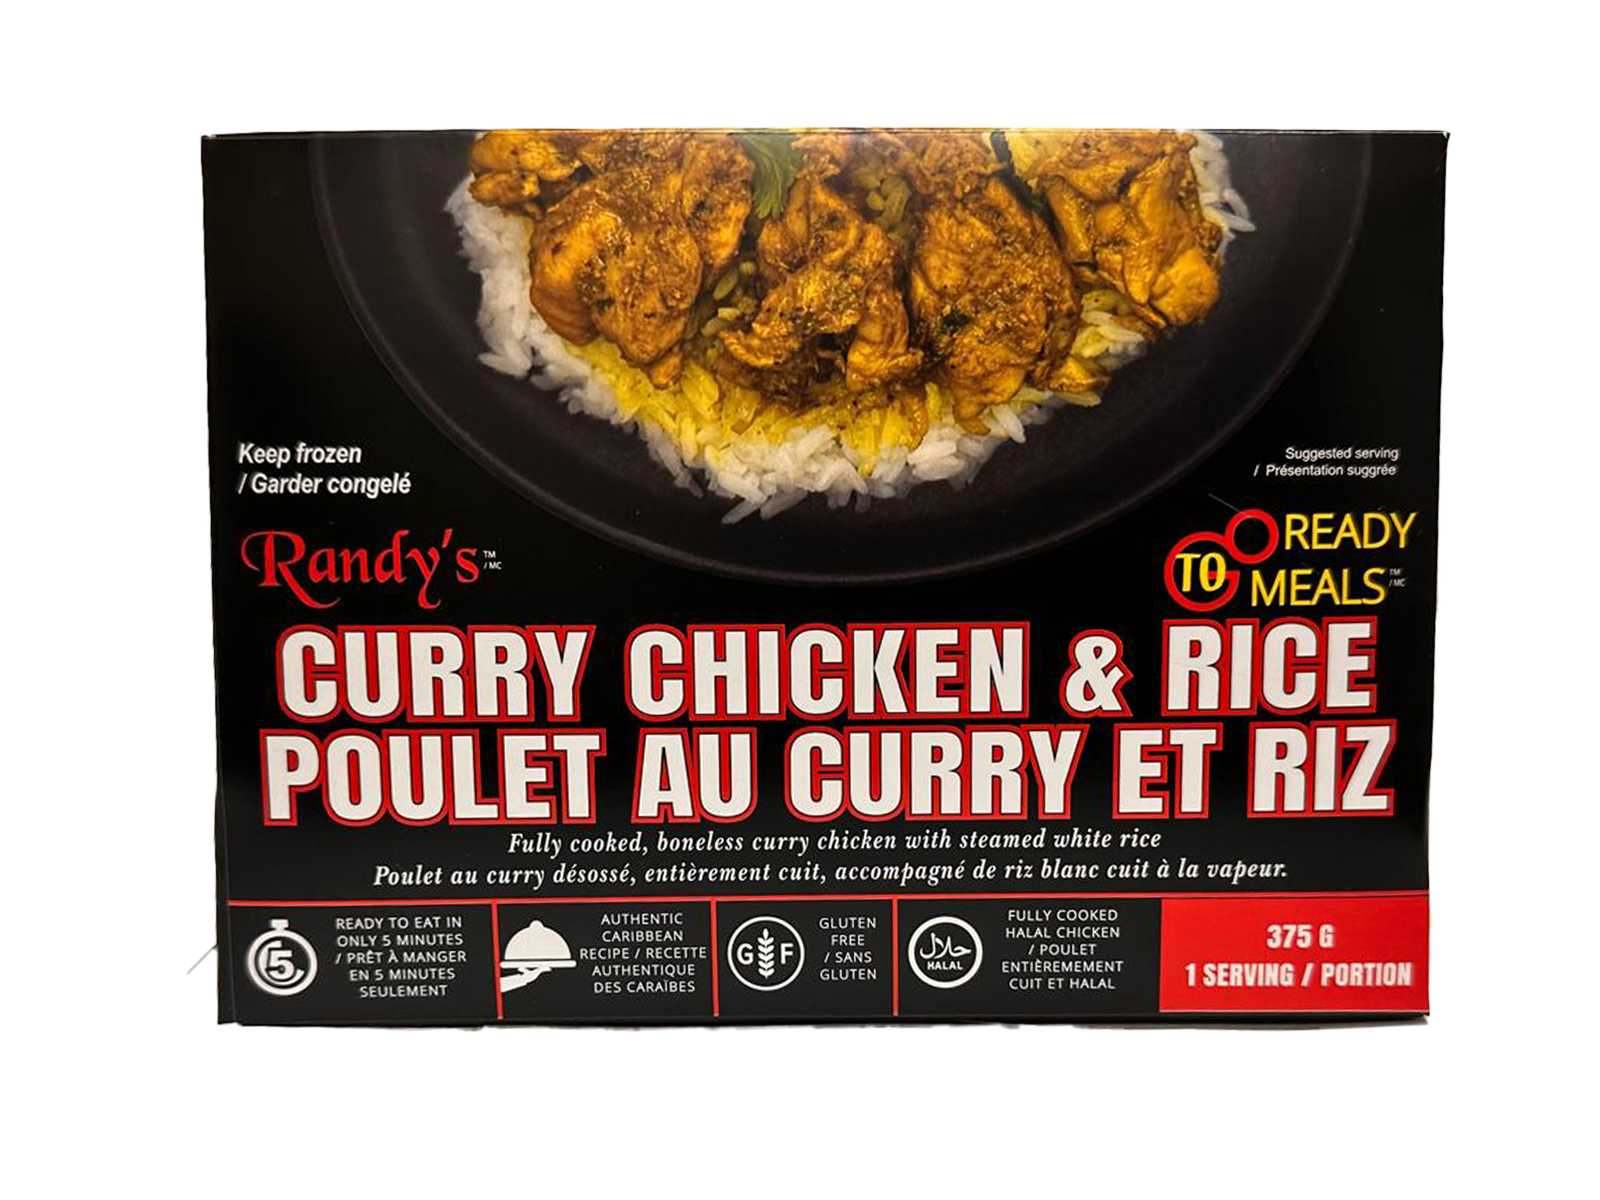 CurryChicken&Rice_Package